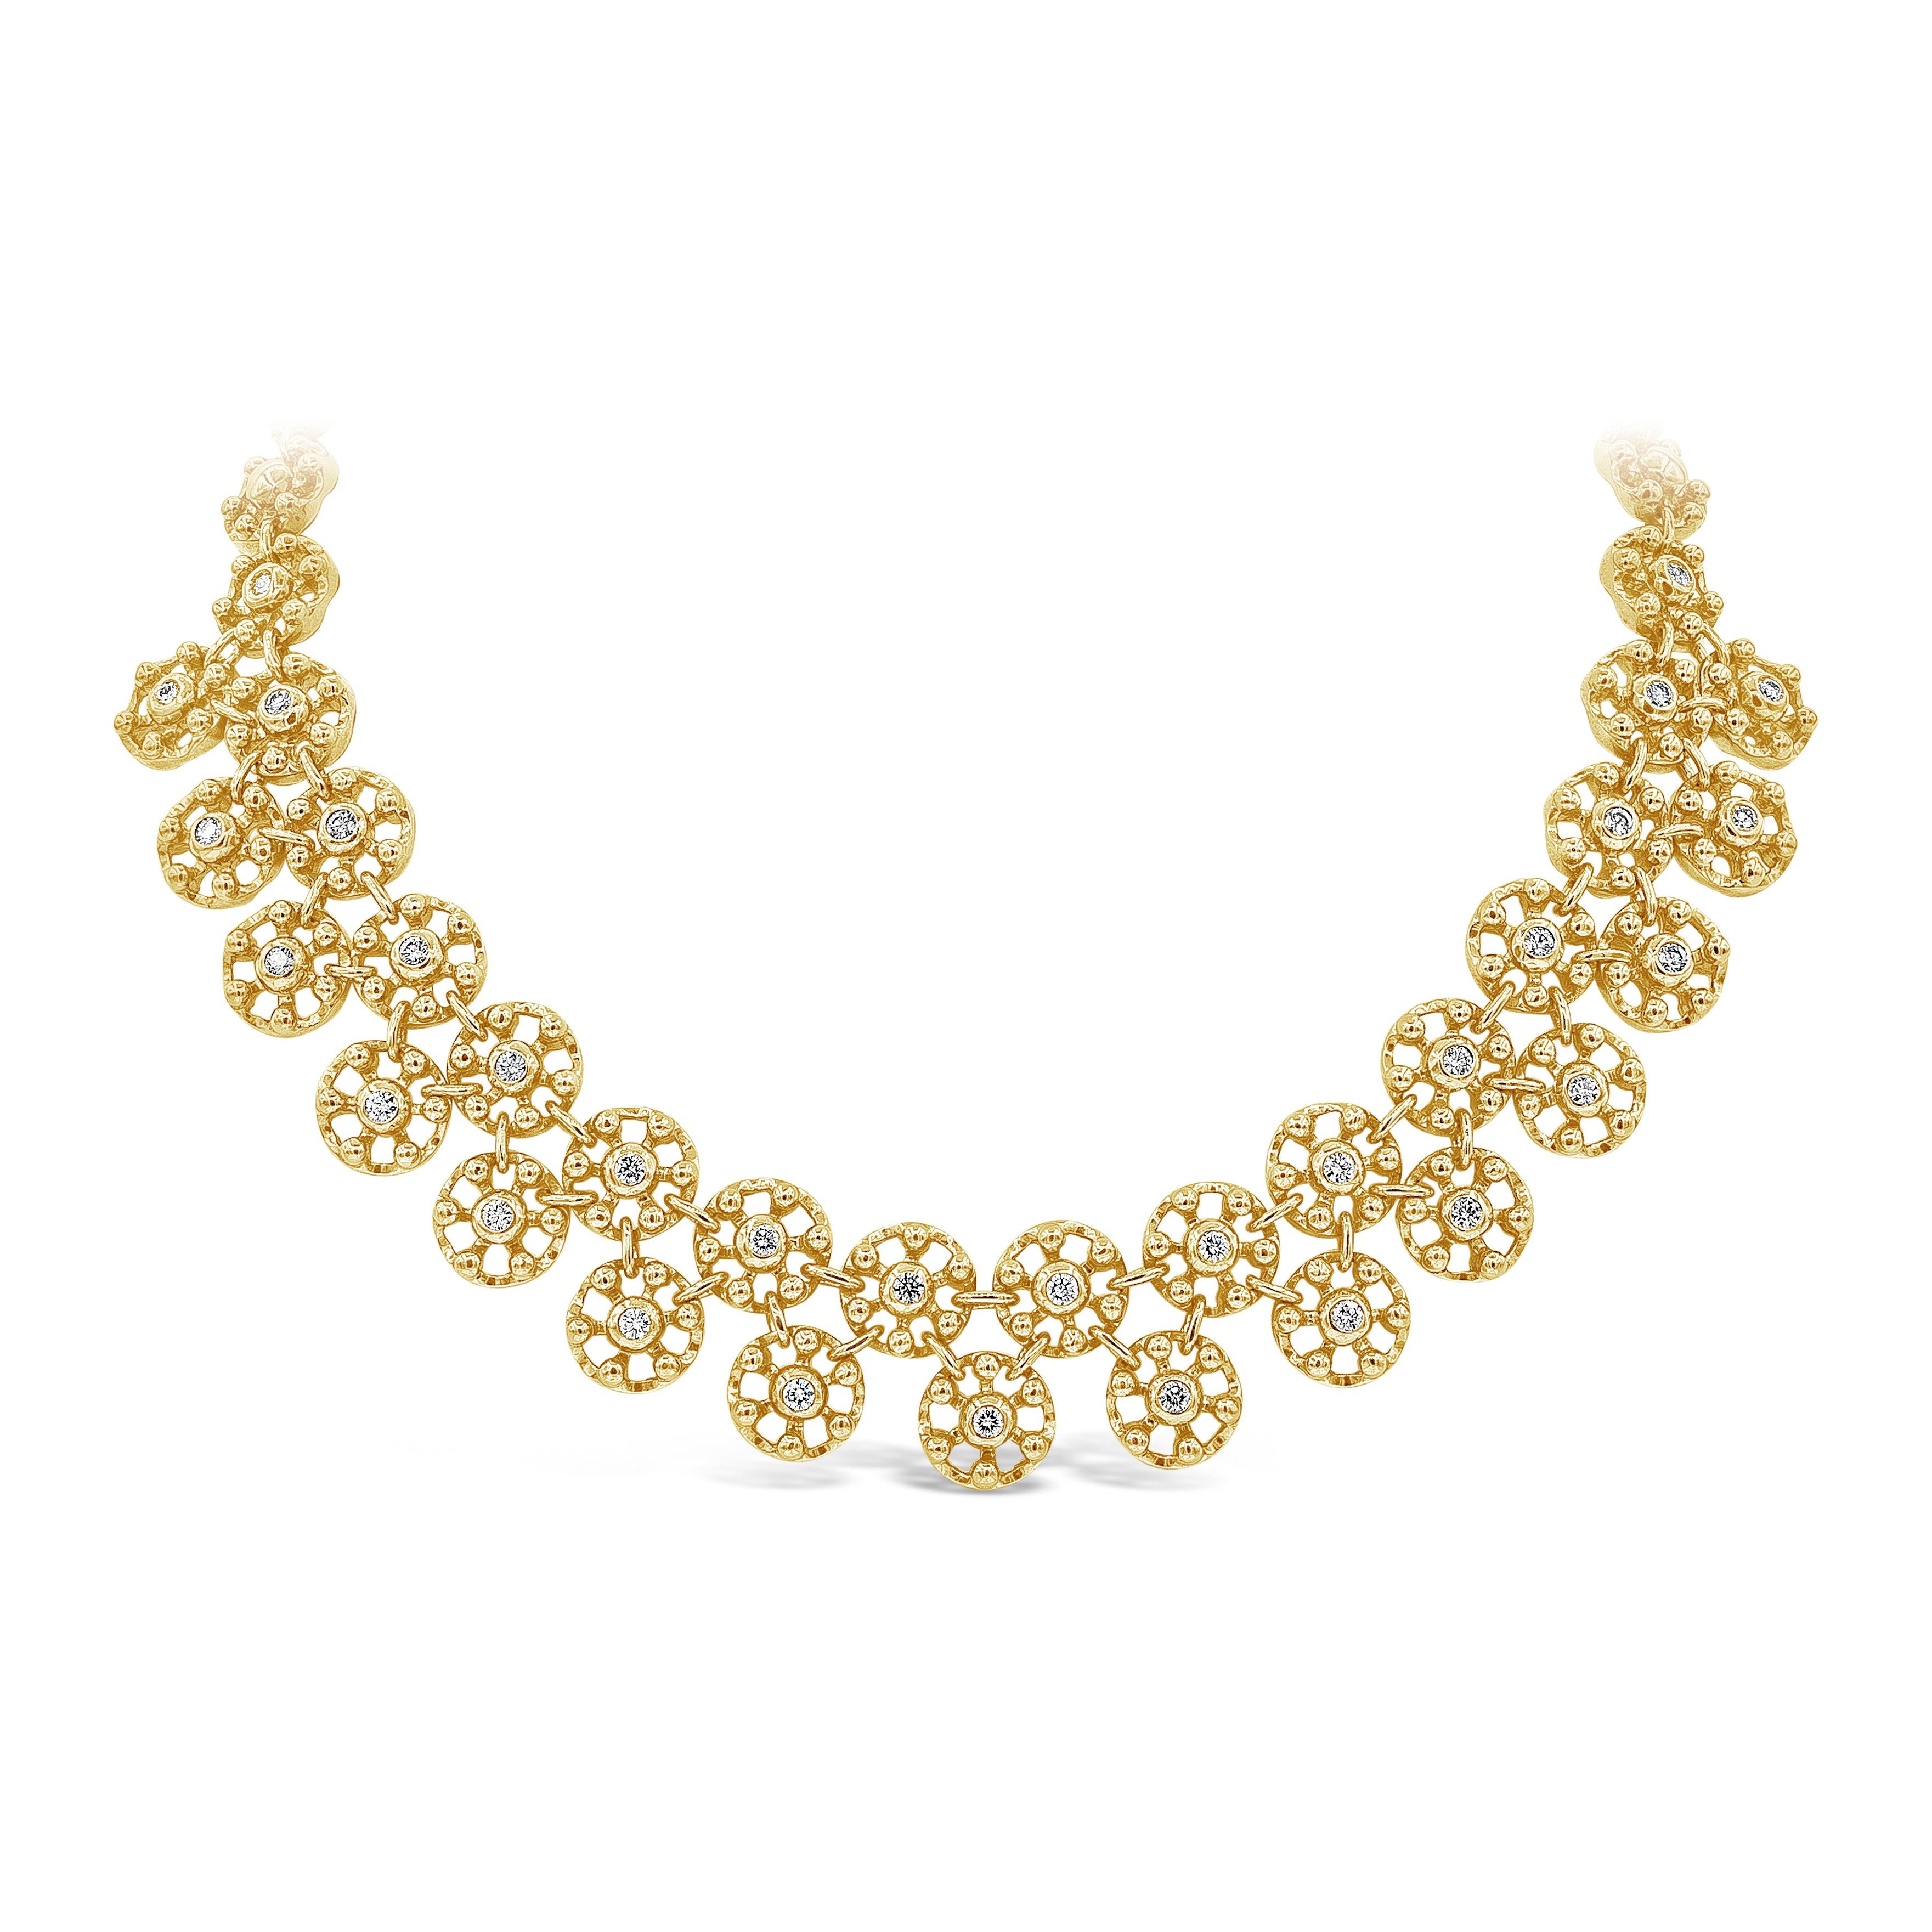 A fashionable and unique necklace showcasing a row of open-work circular designs embedded with round brilliant diamond centers. Diamonds weigh 2.17 carats total and are approximately G color, SI clarity. Made in 18 karat yellow gold.